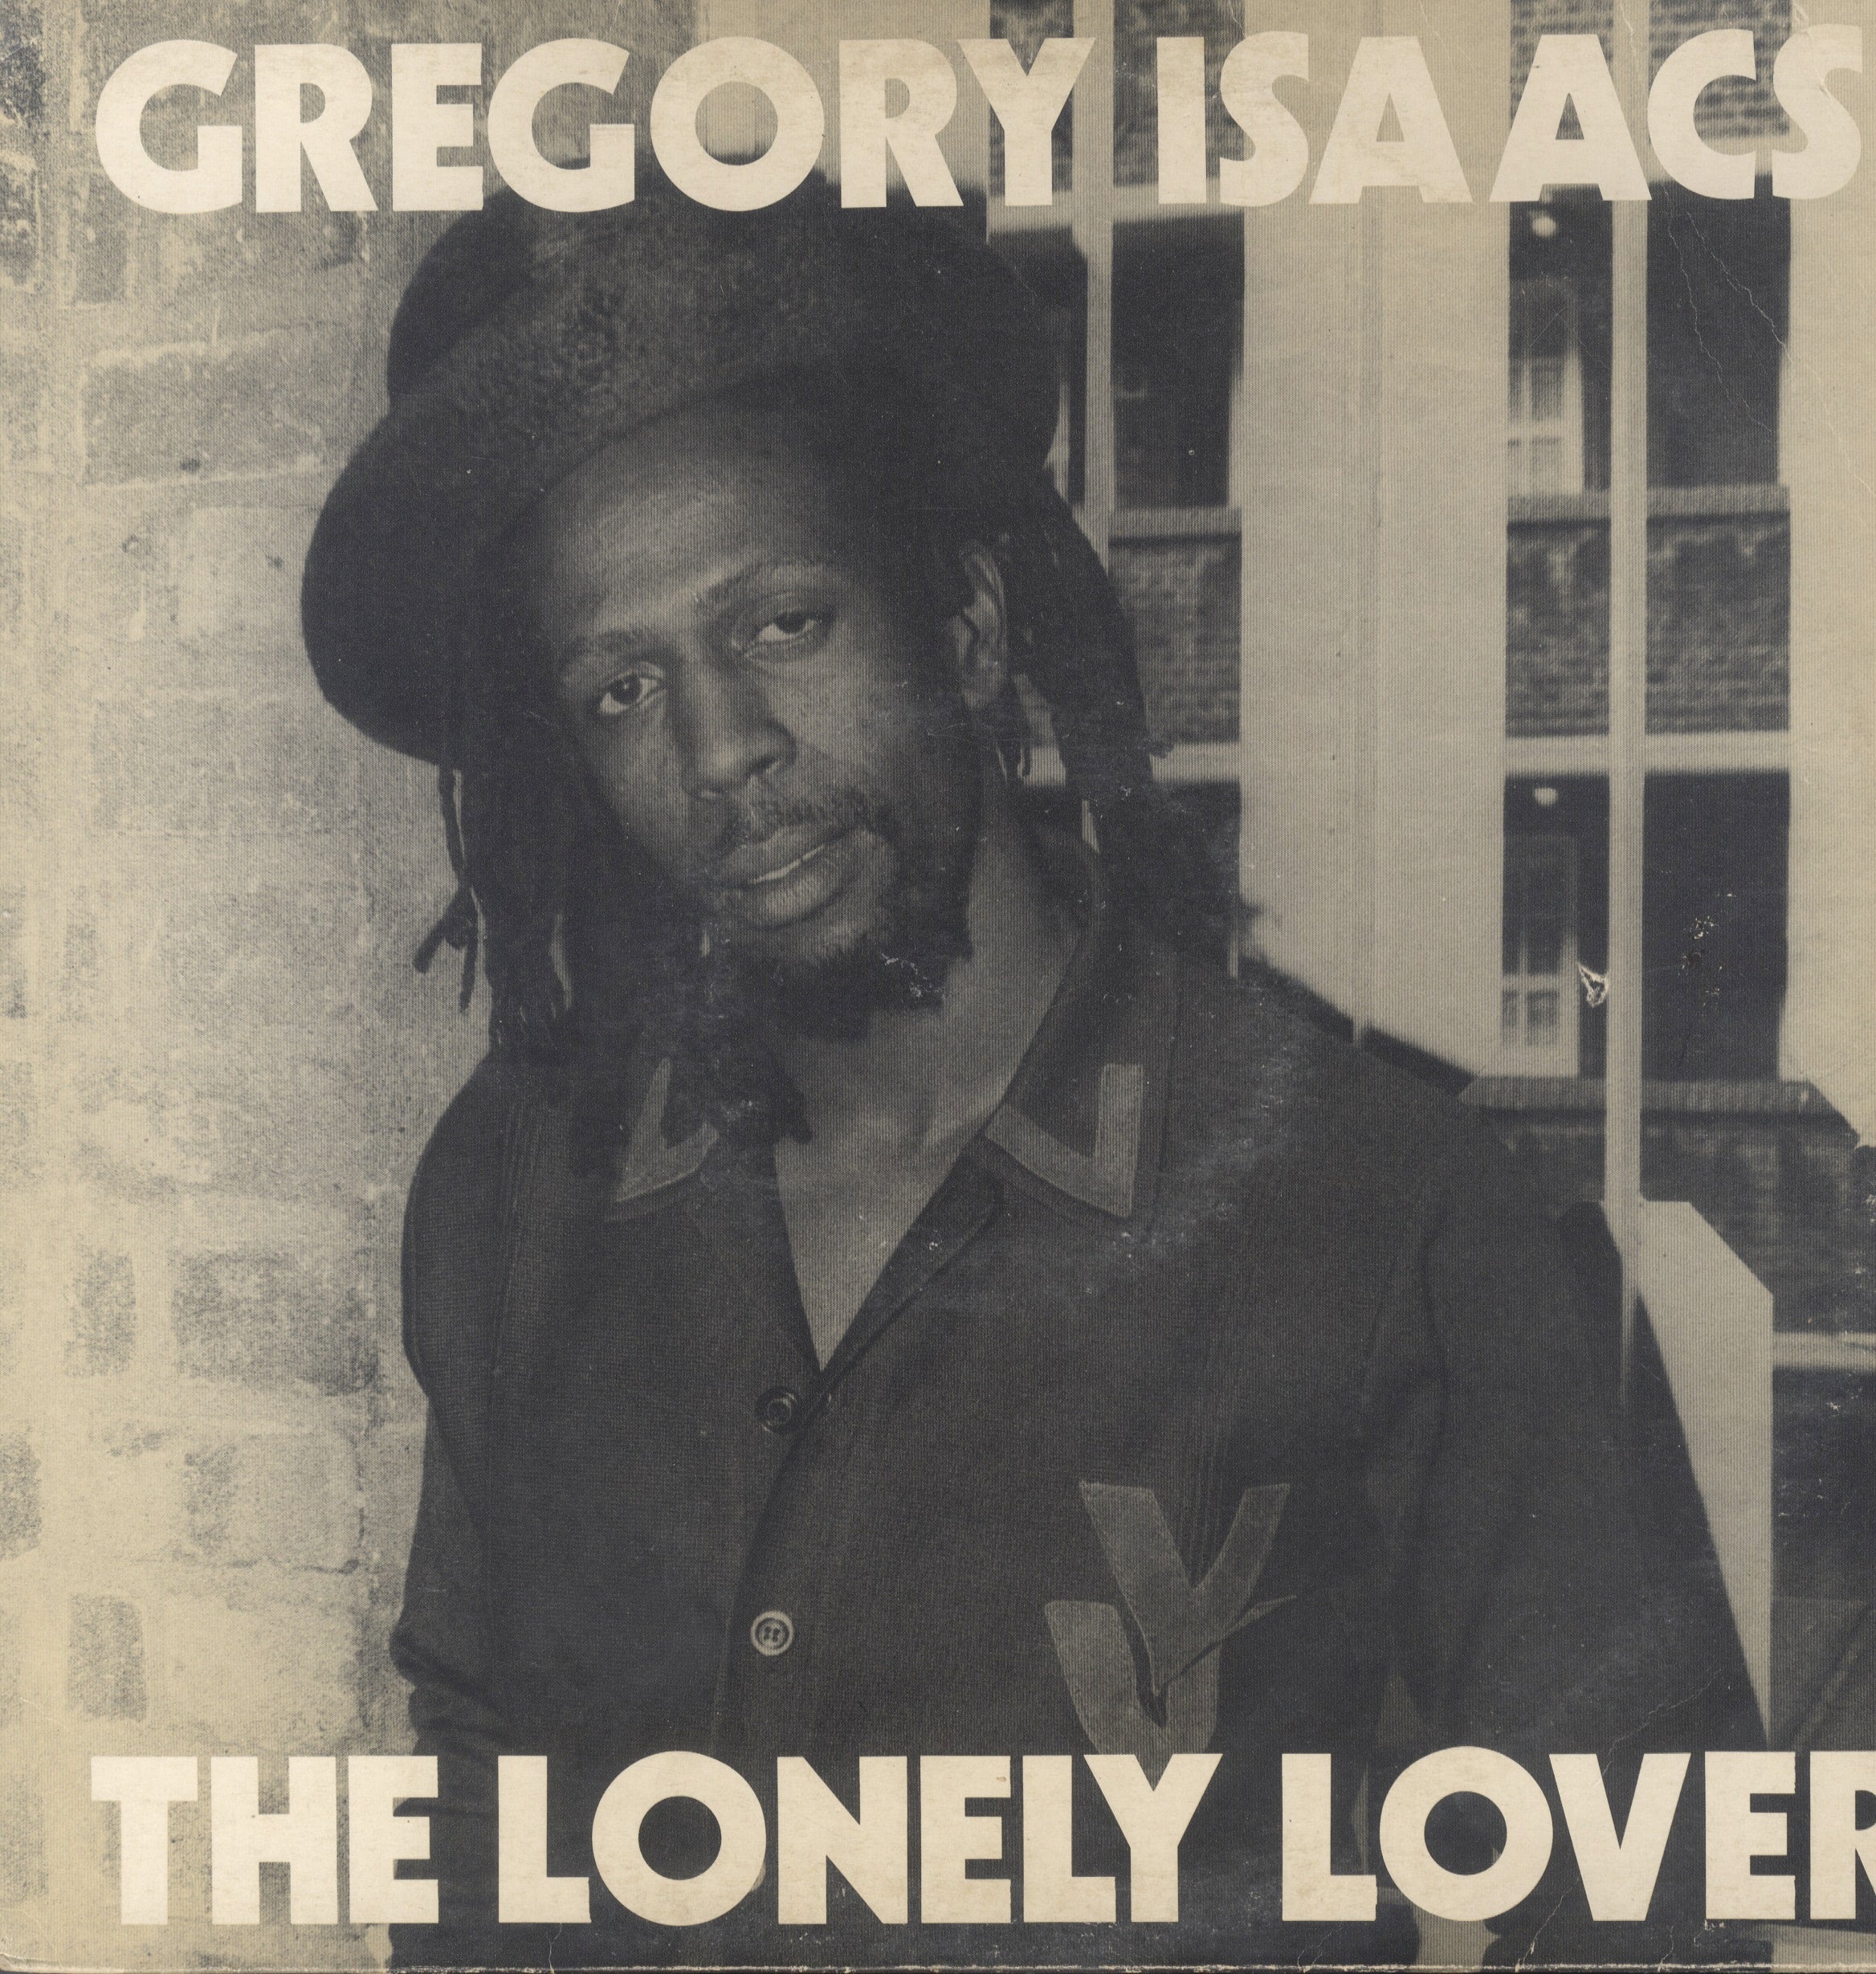 GREGORY ISAACS [The Lonely Lover]